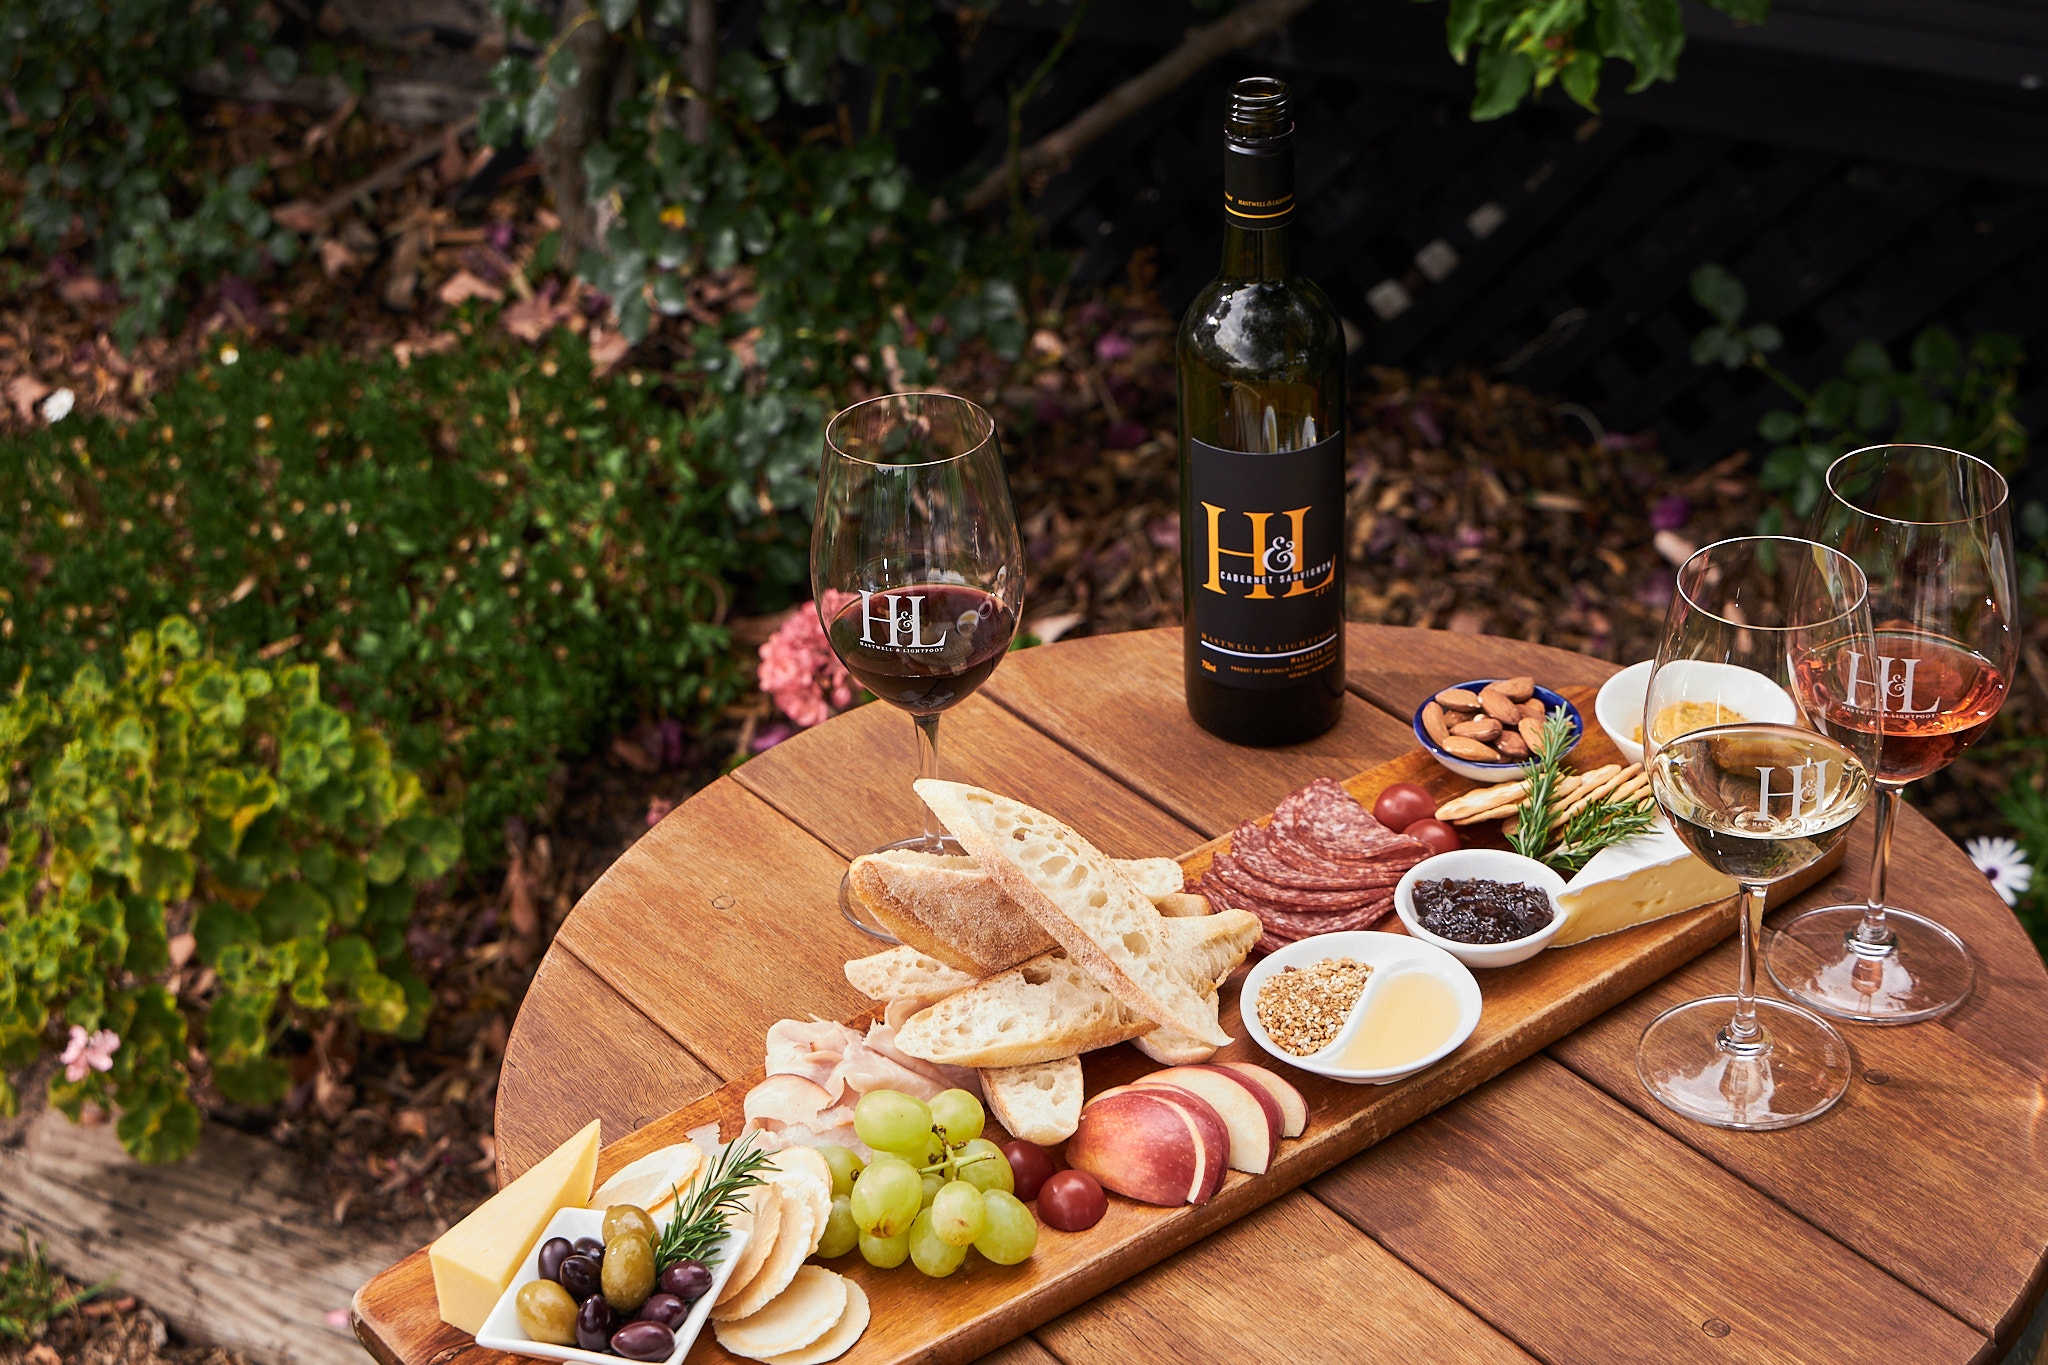 Platter Lunch & Wine Tasting Experience for 2